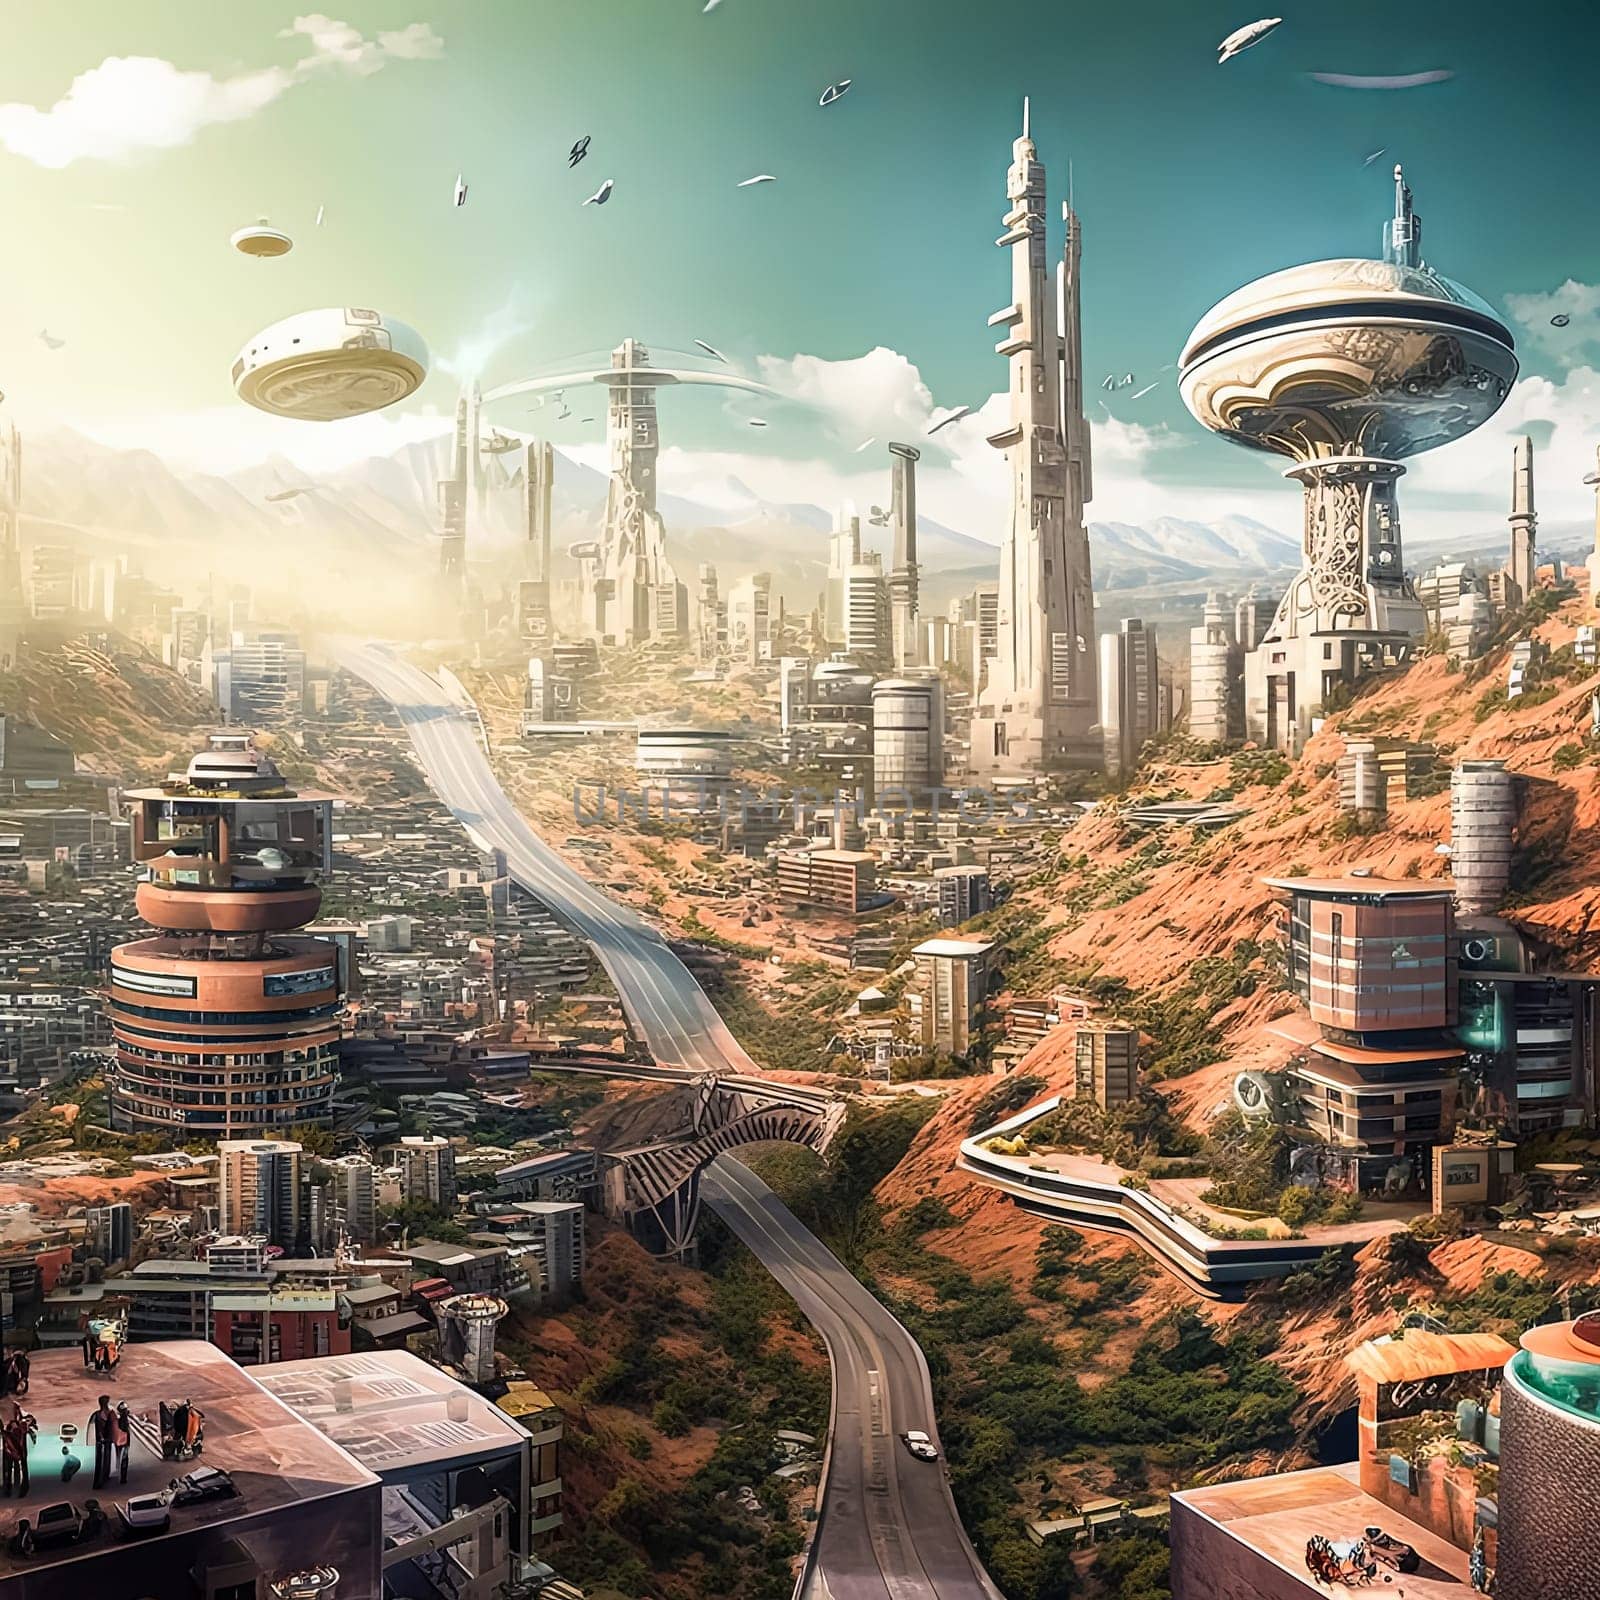 A futuristic cityscape with tall buildings and a road in the middle. The sky is blue and the sun is shining